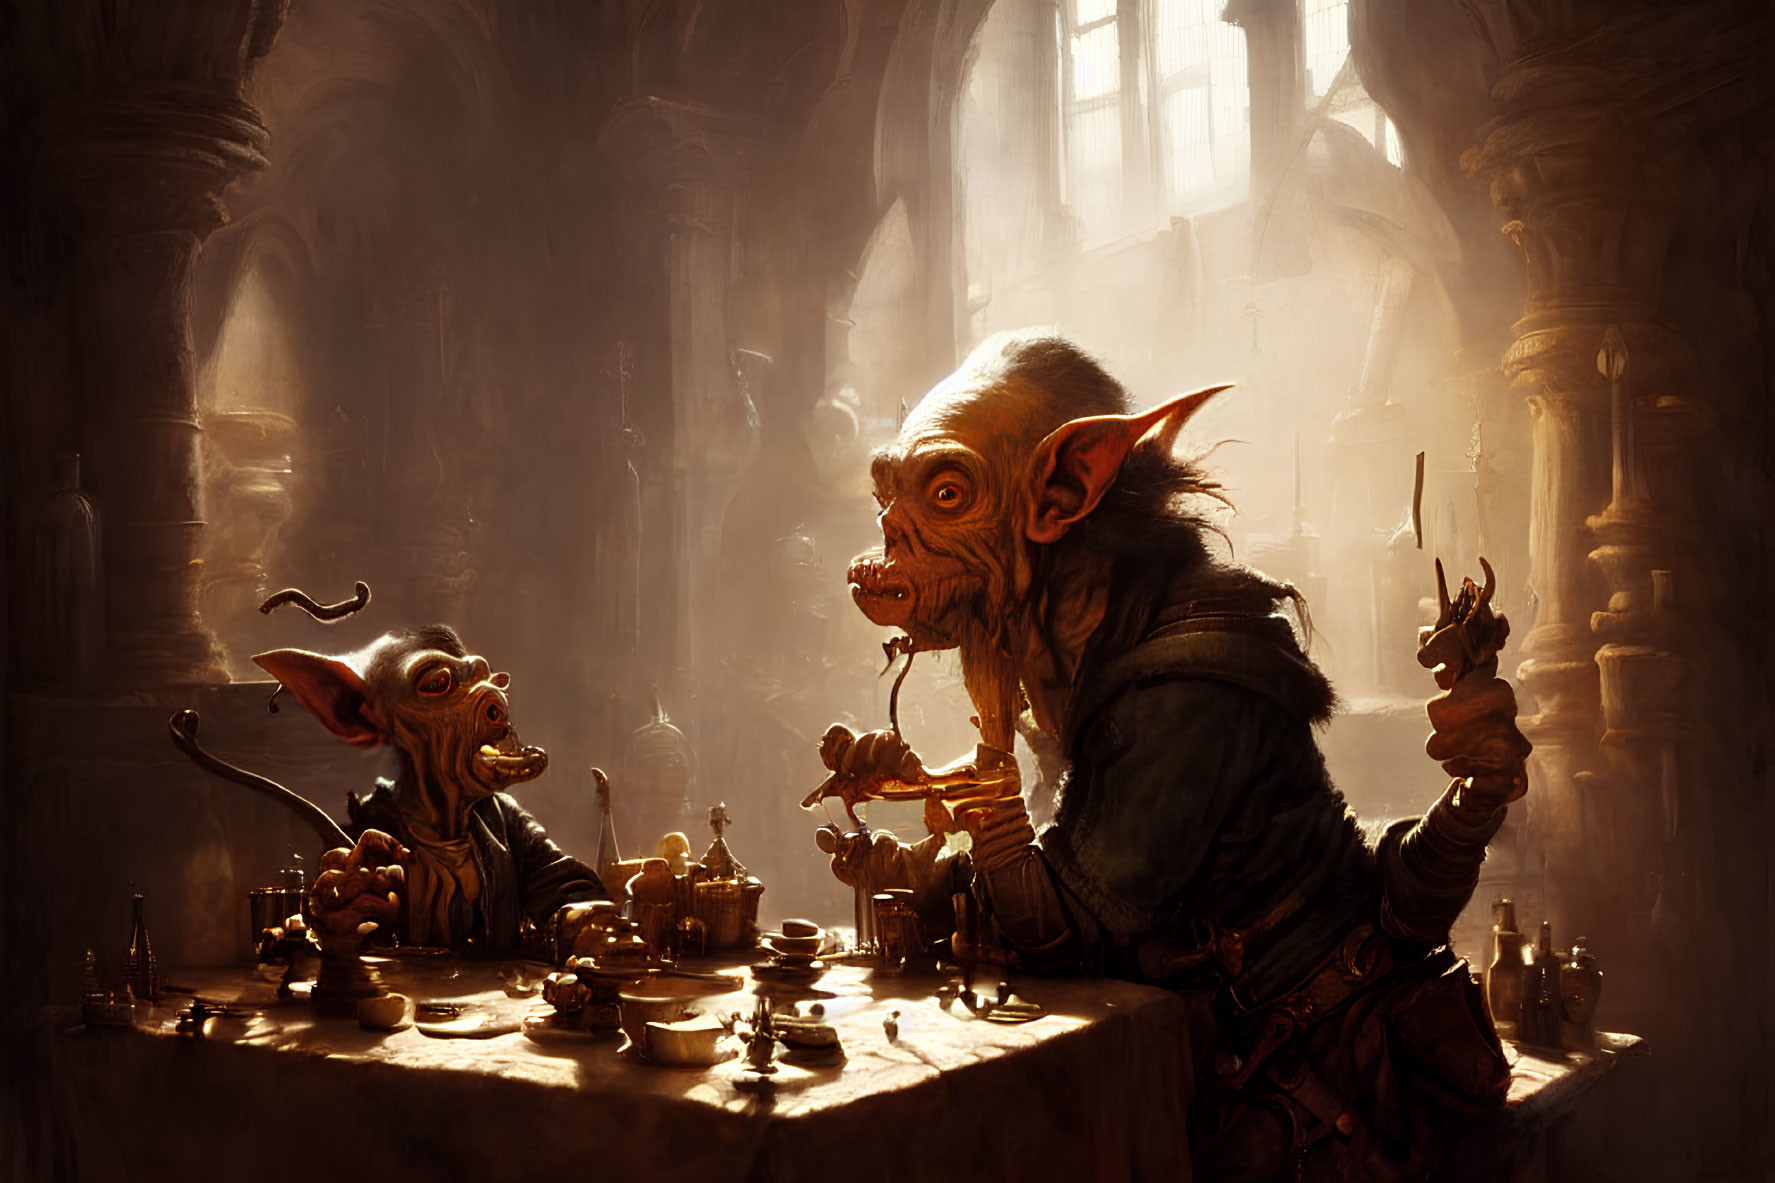 Two goblins conversing at cluttered table in dimly lit cavern